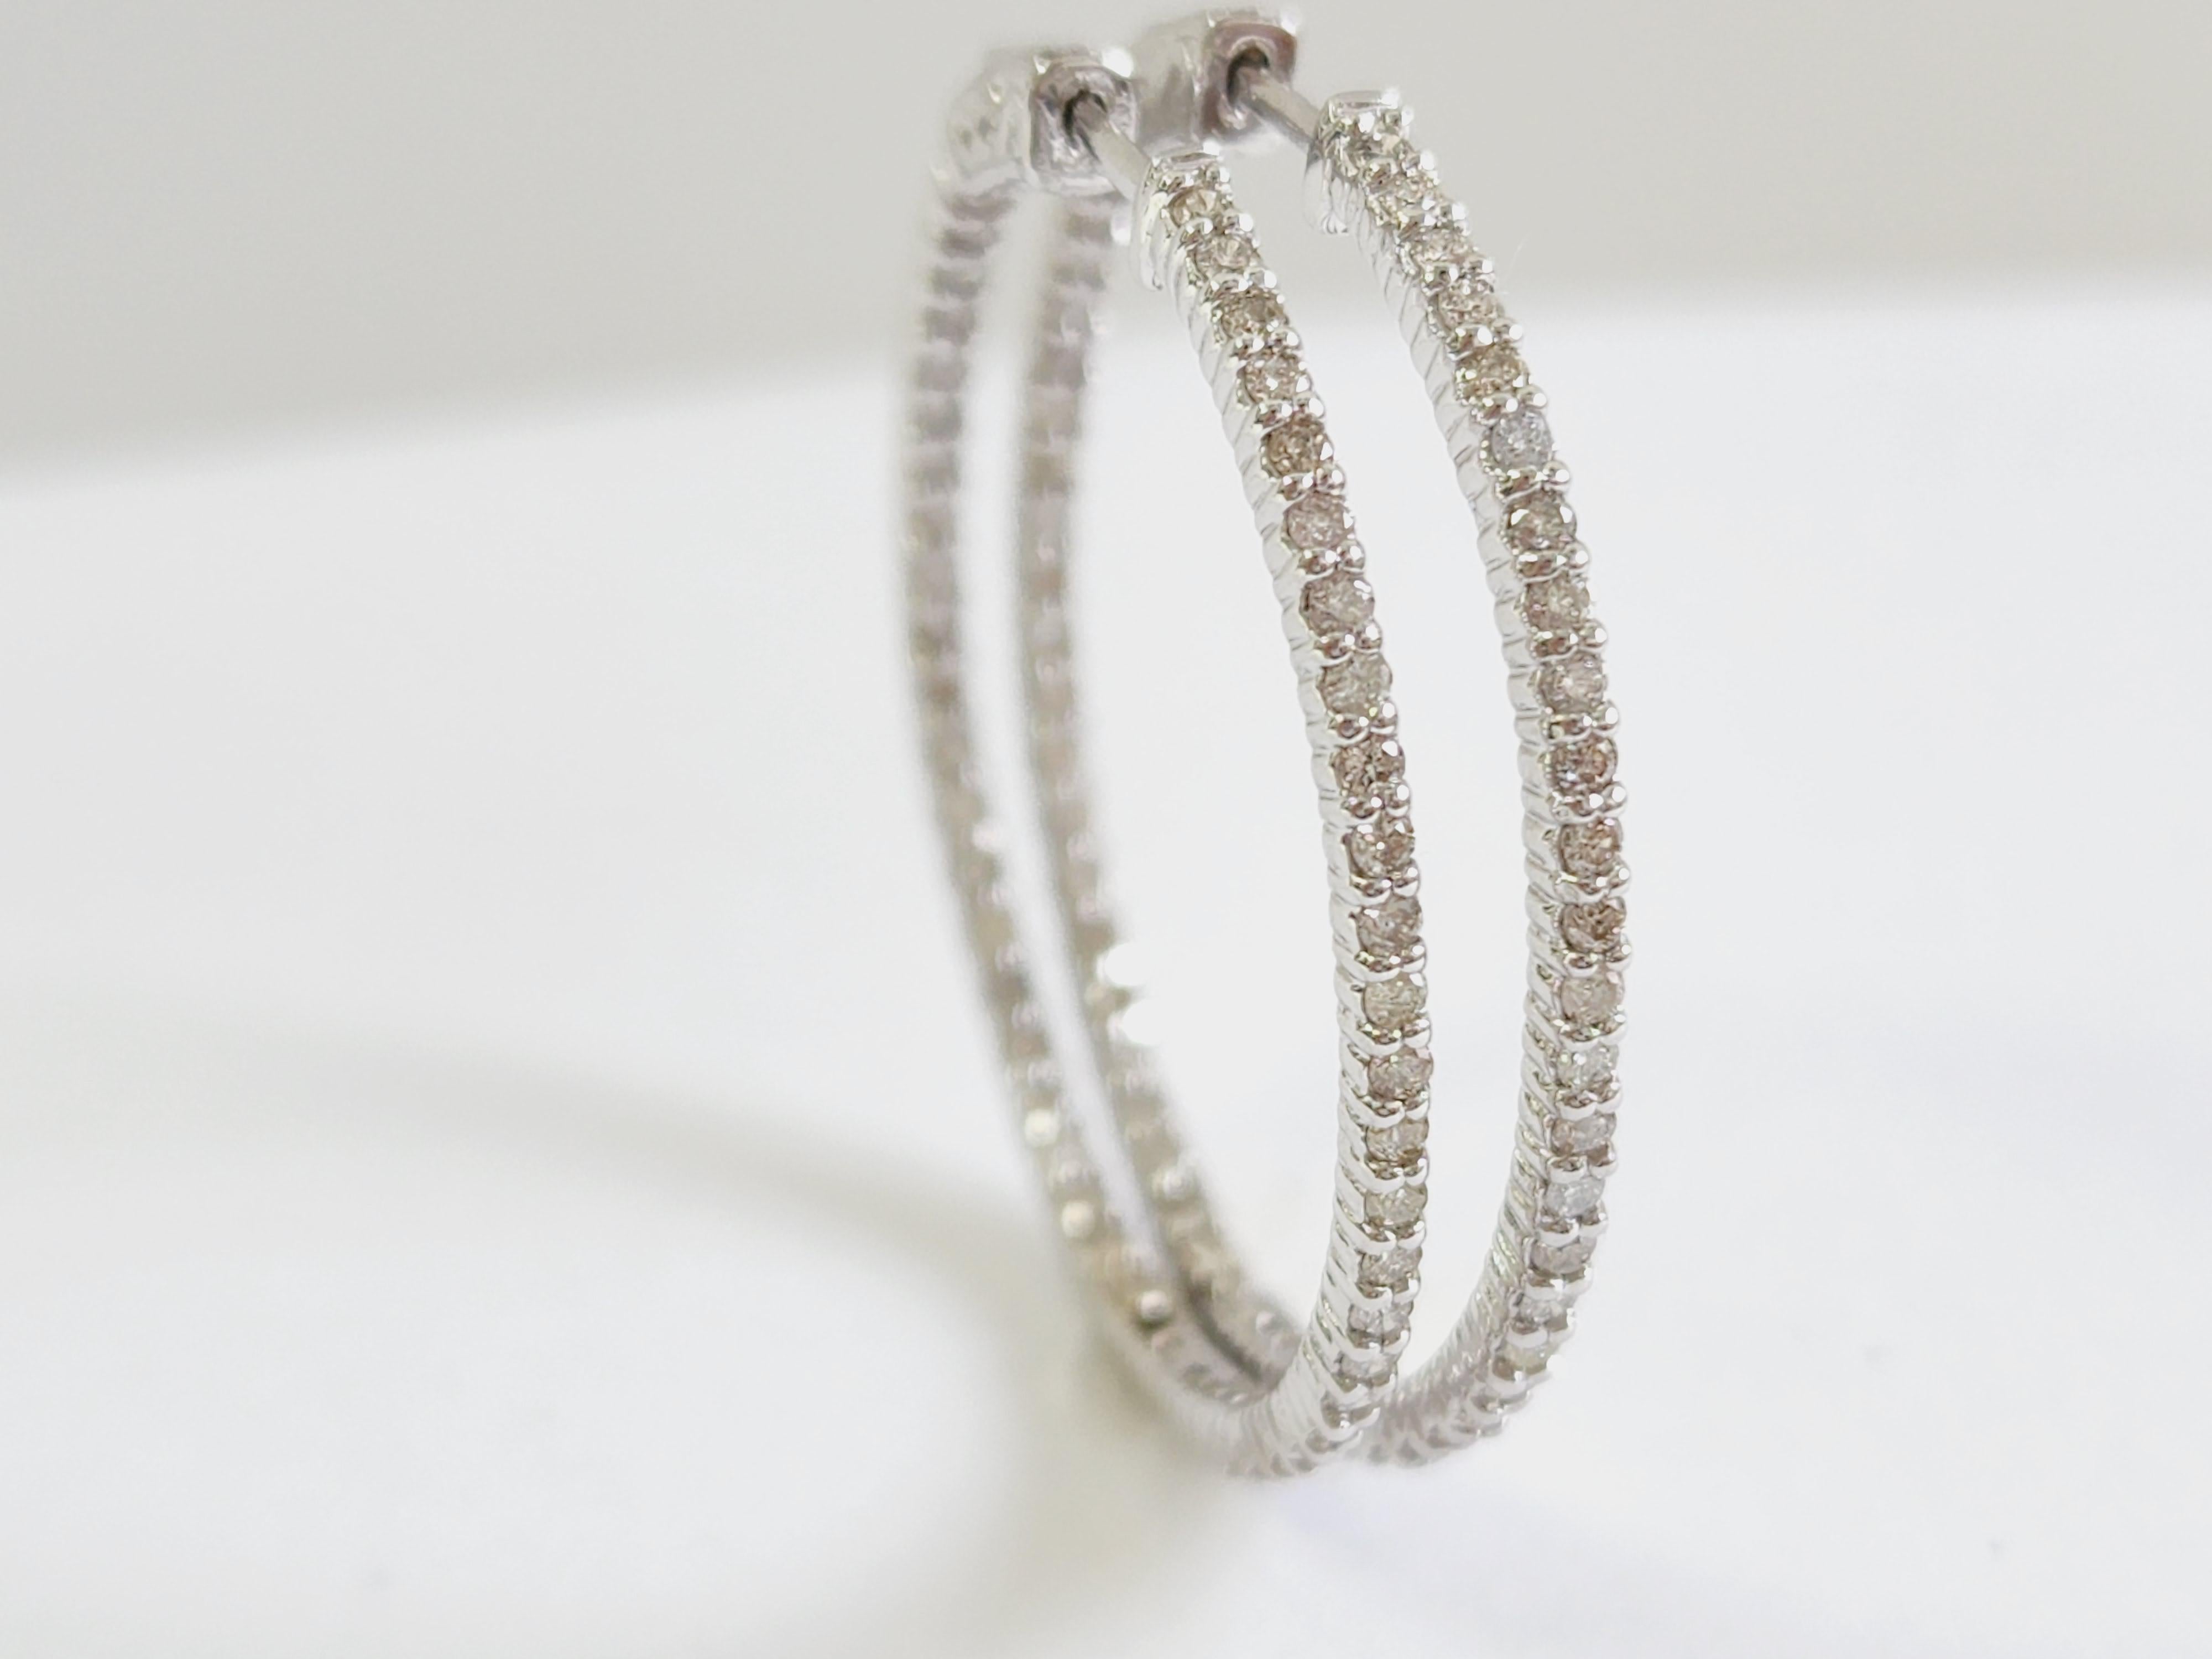 Beautiful pair of diamond inside out hoop earrings in 14k white gold. Secures with snap closure for wear.  
Measures 1.25 inch x 1.25 inch diameter. 
Average H Color, SI Clarity

*Free shipping within the US